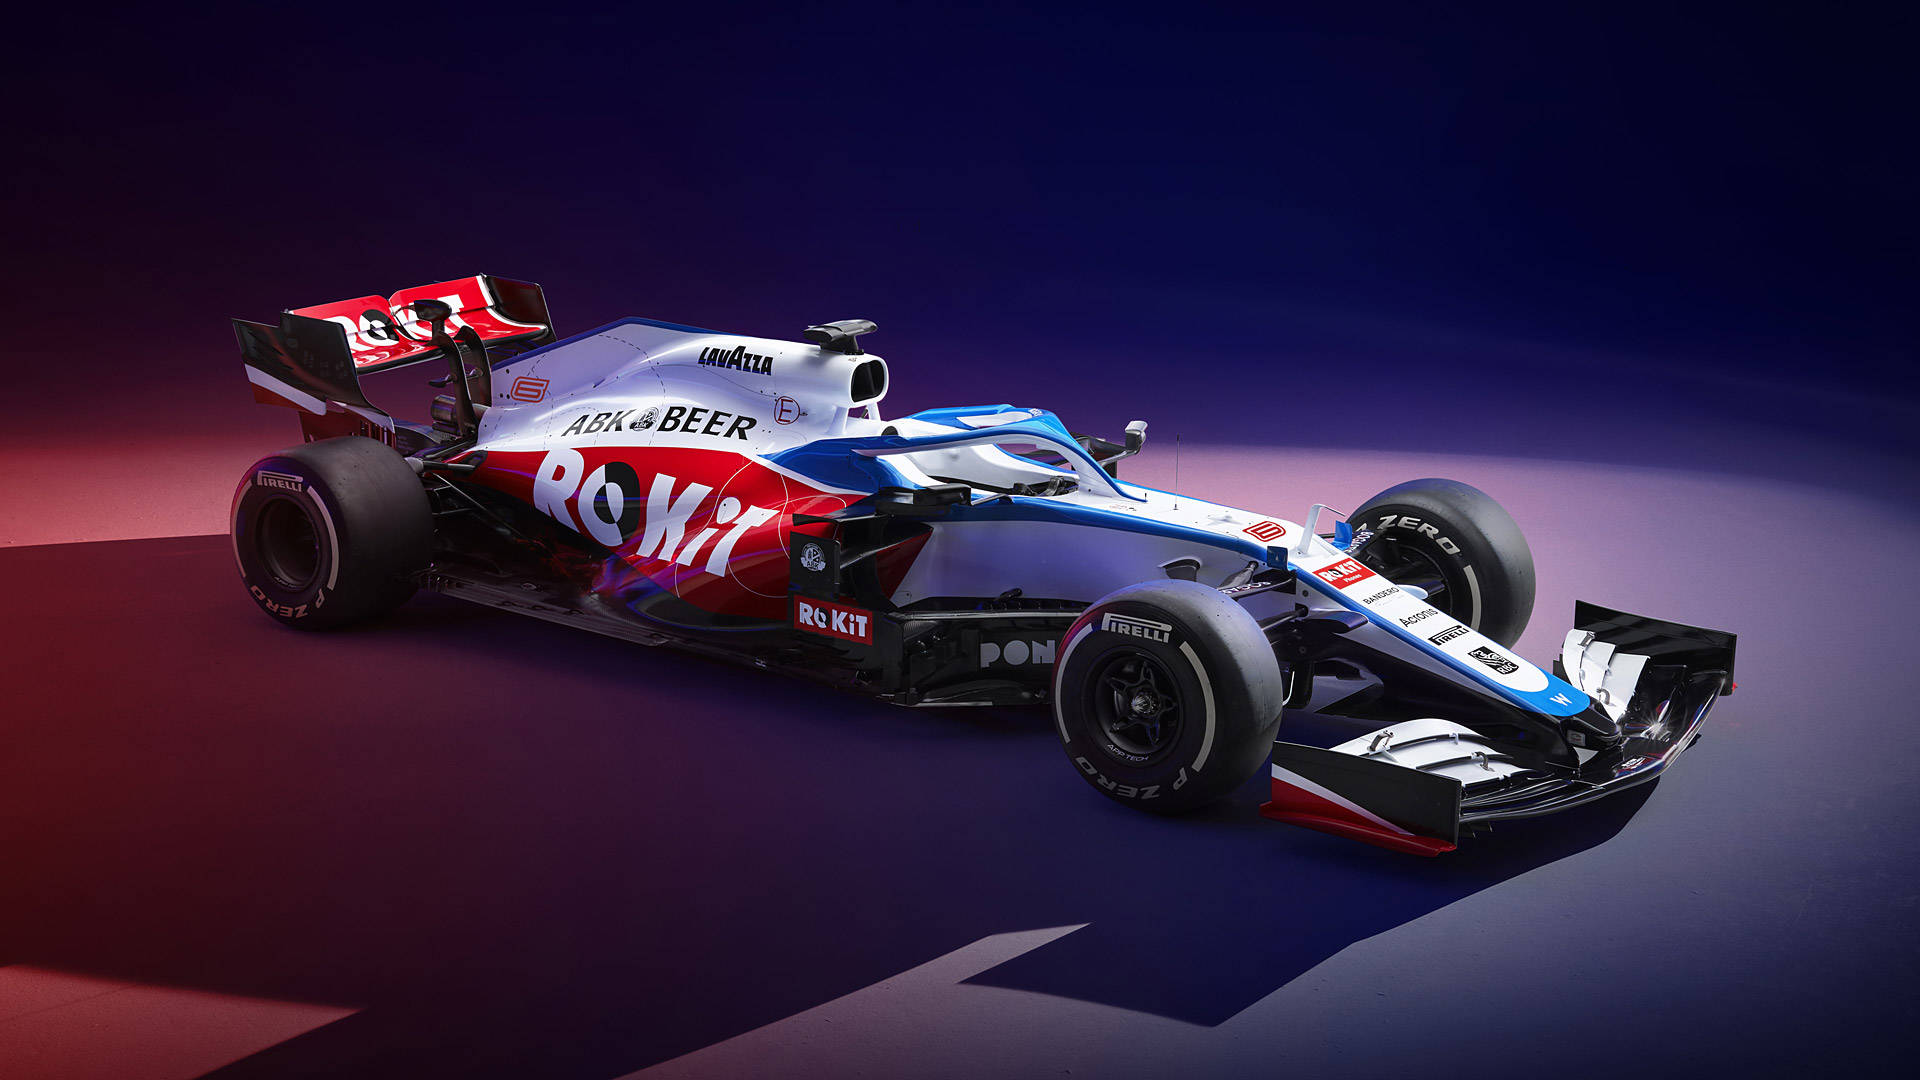 Blue, Red, And White Williams Car Wallpaper